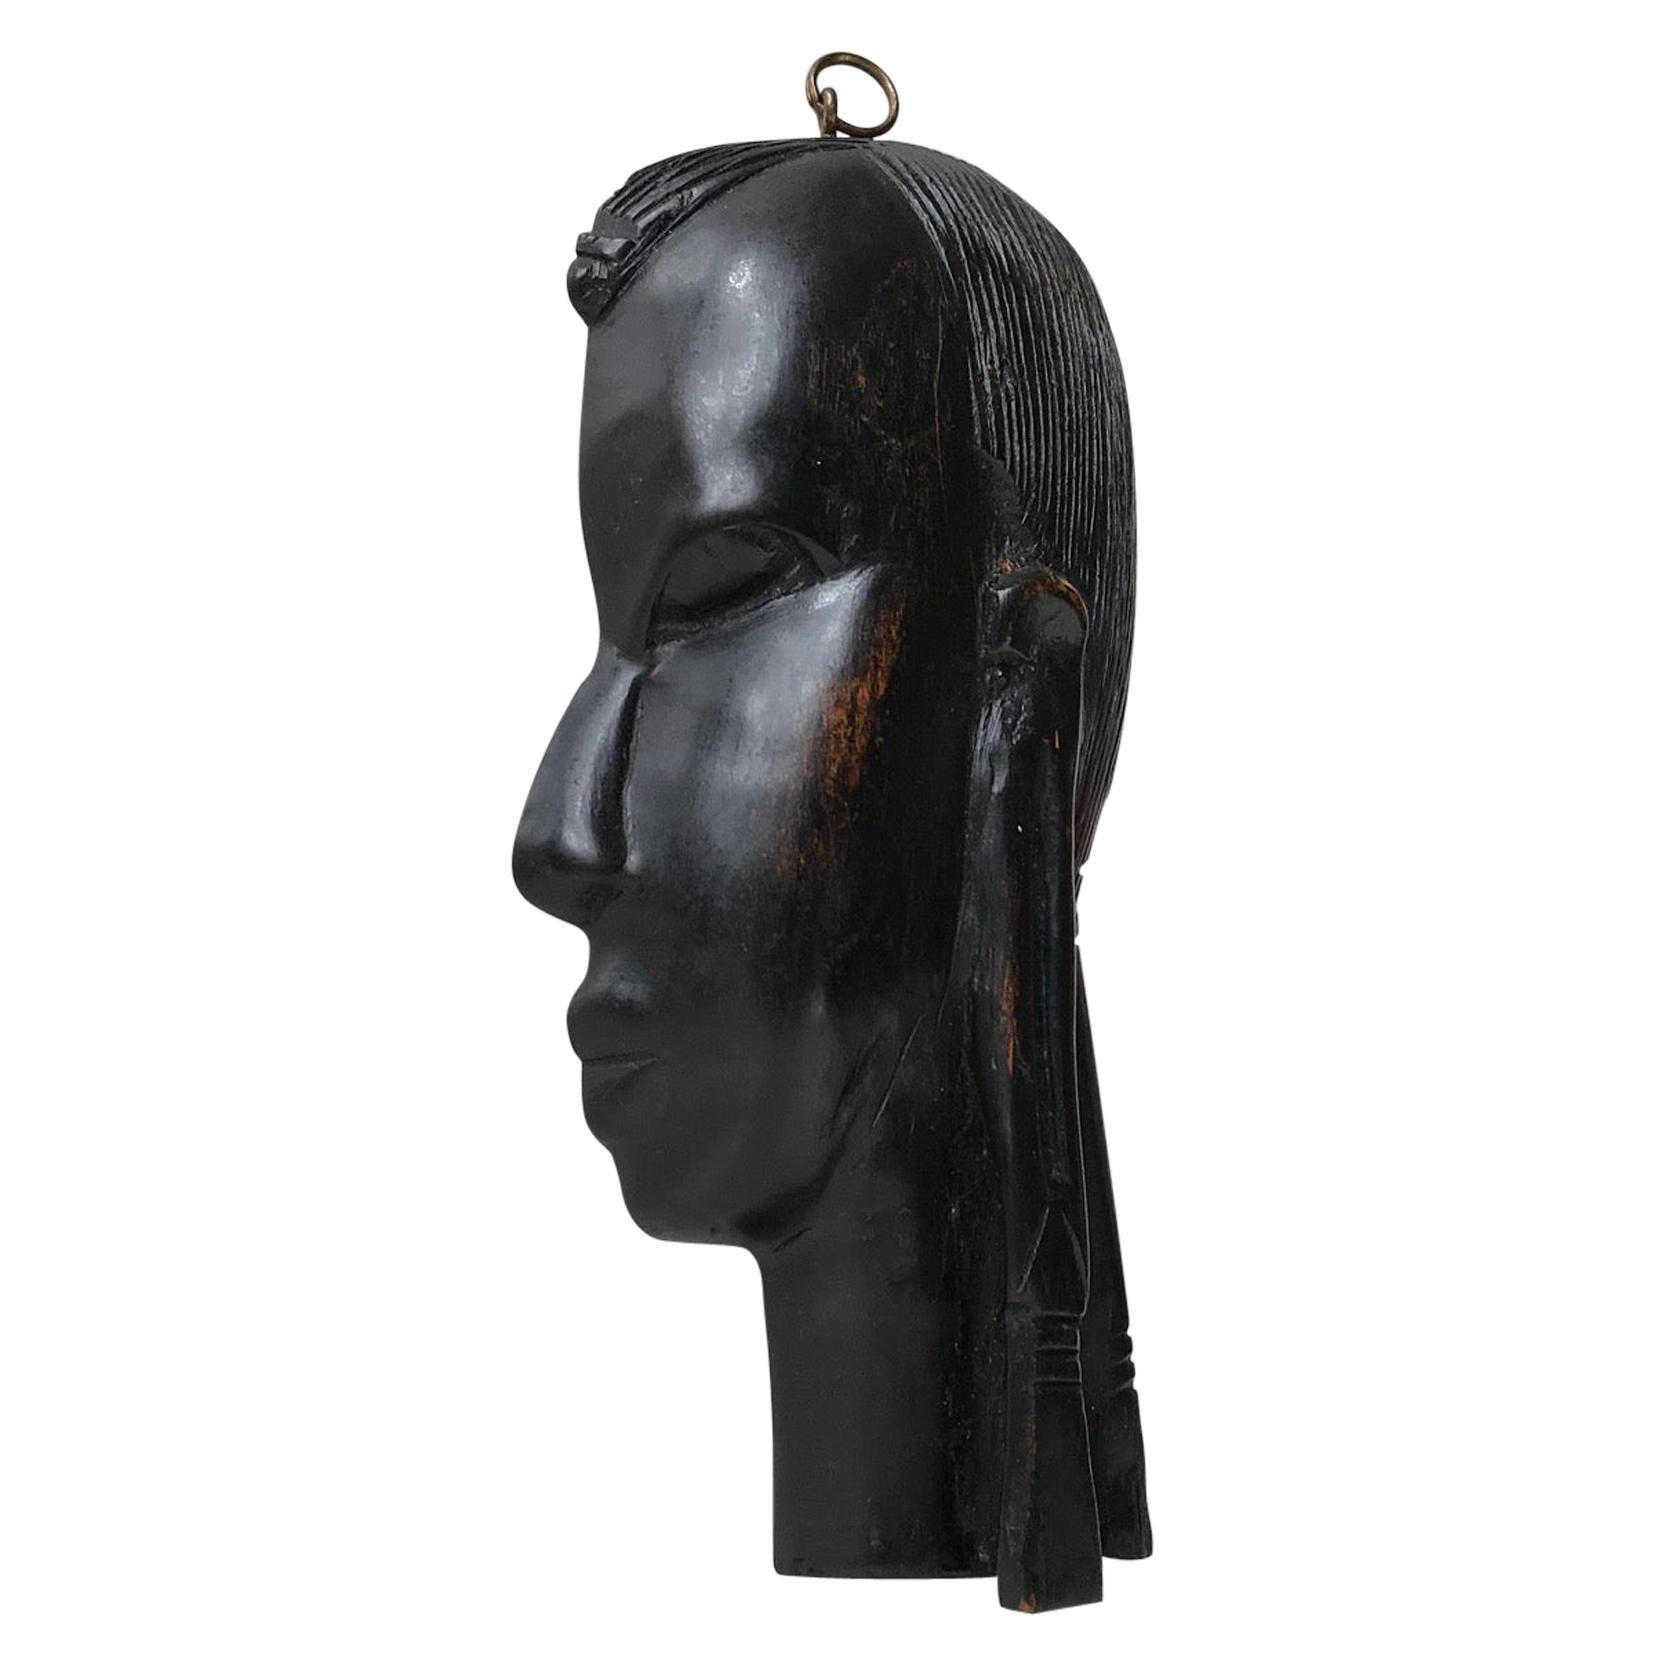 Vintage African Face Wall Plaque in Ebony, 1960s For Sale